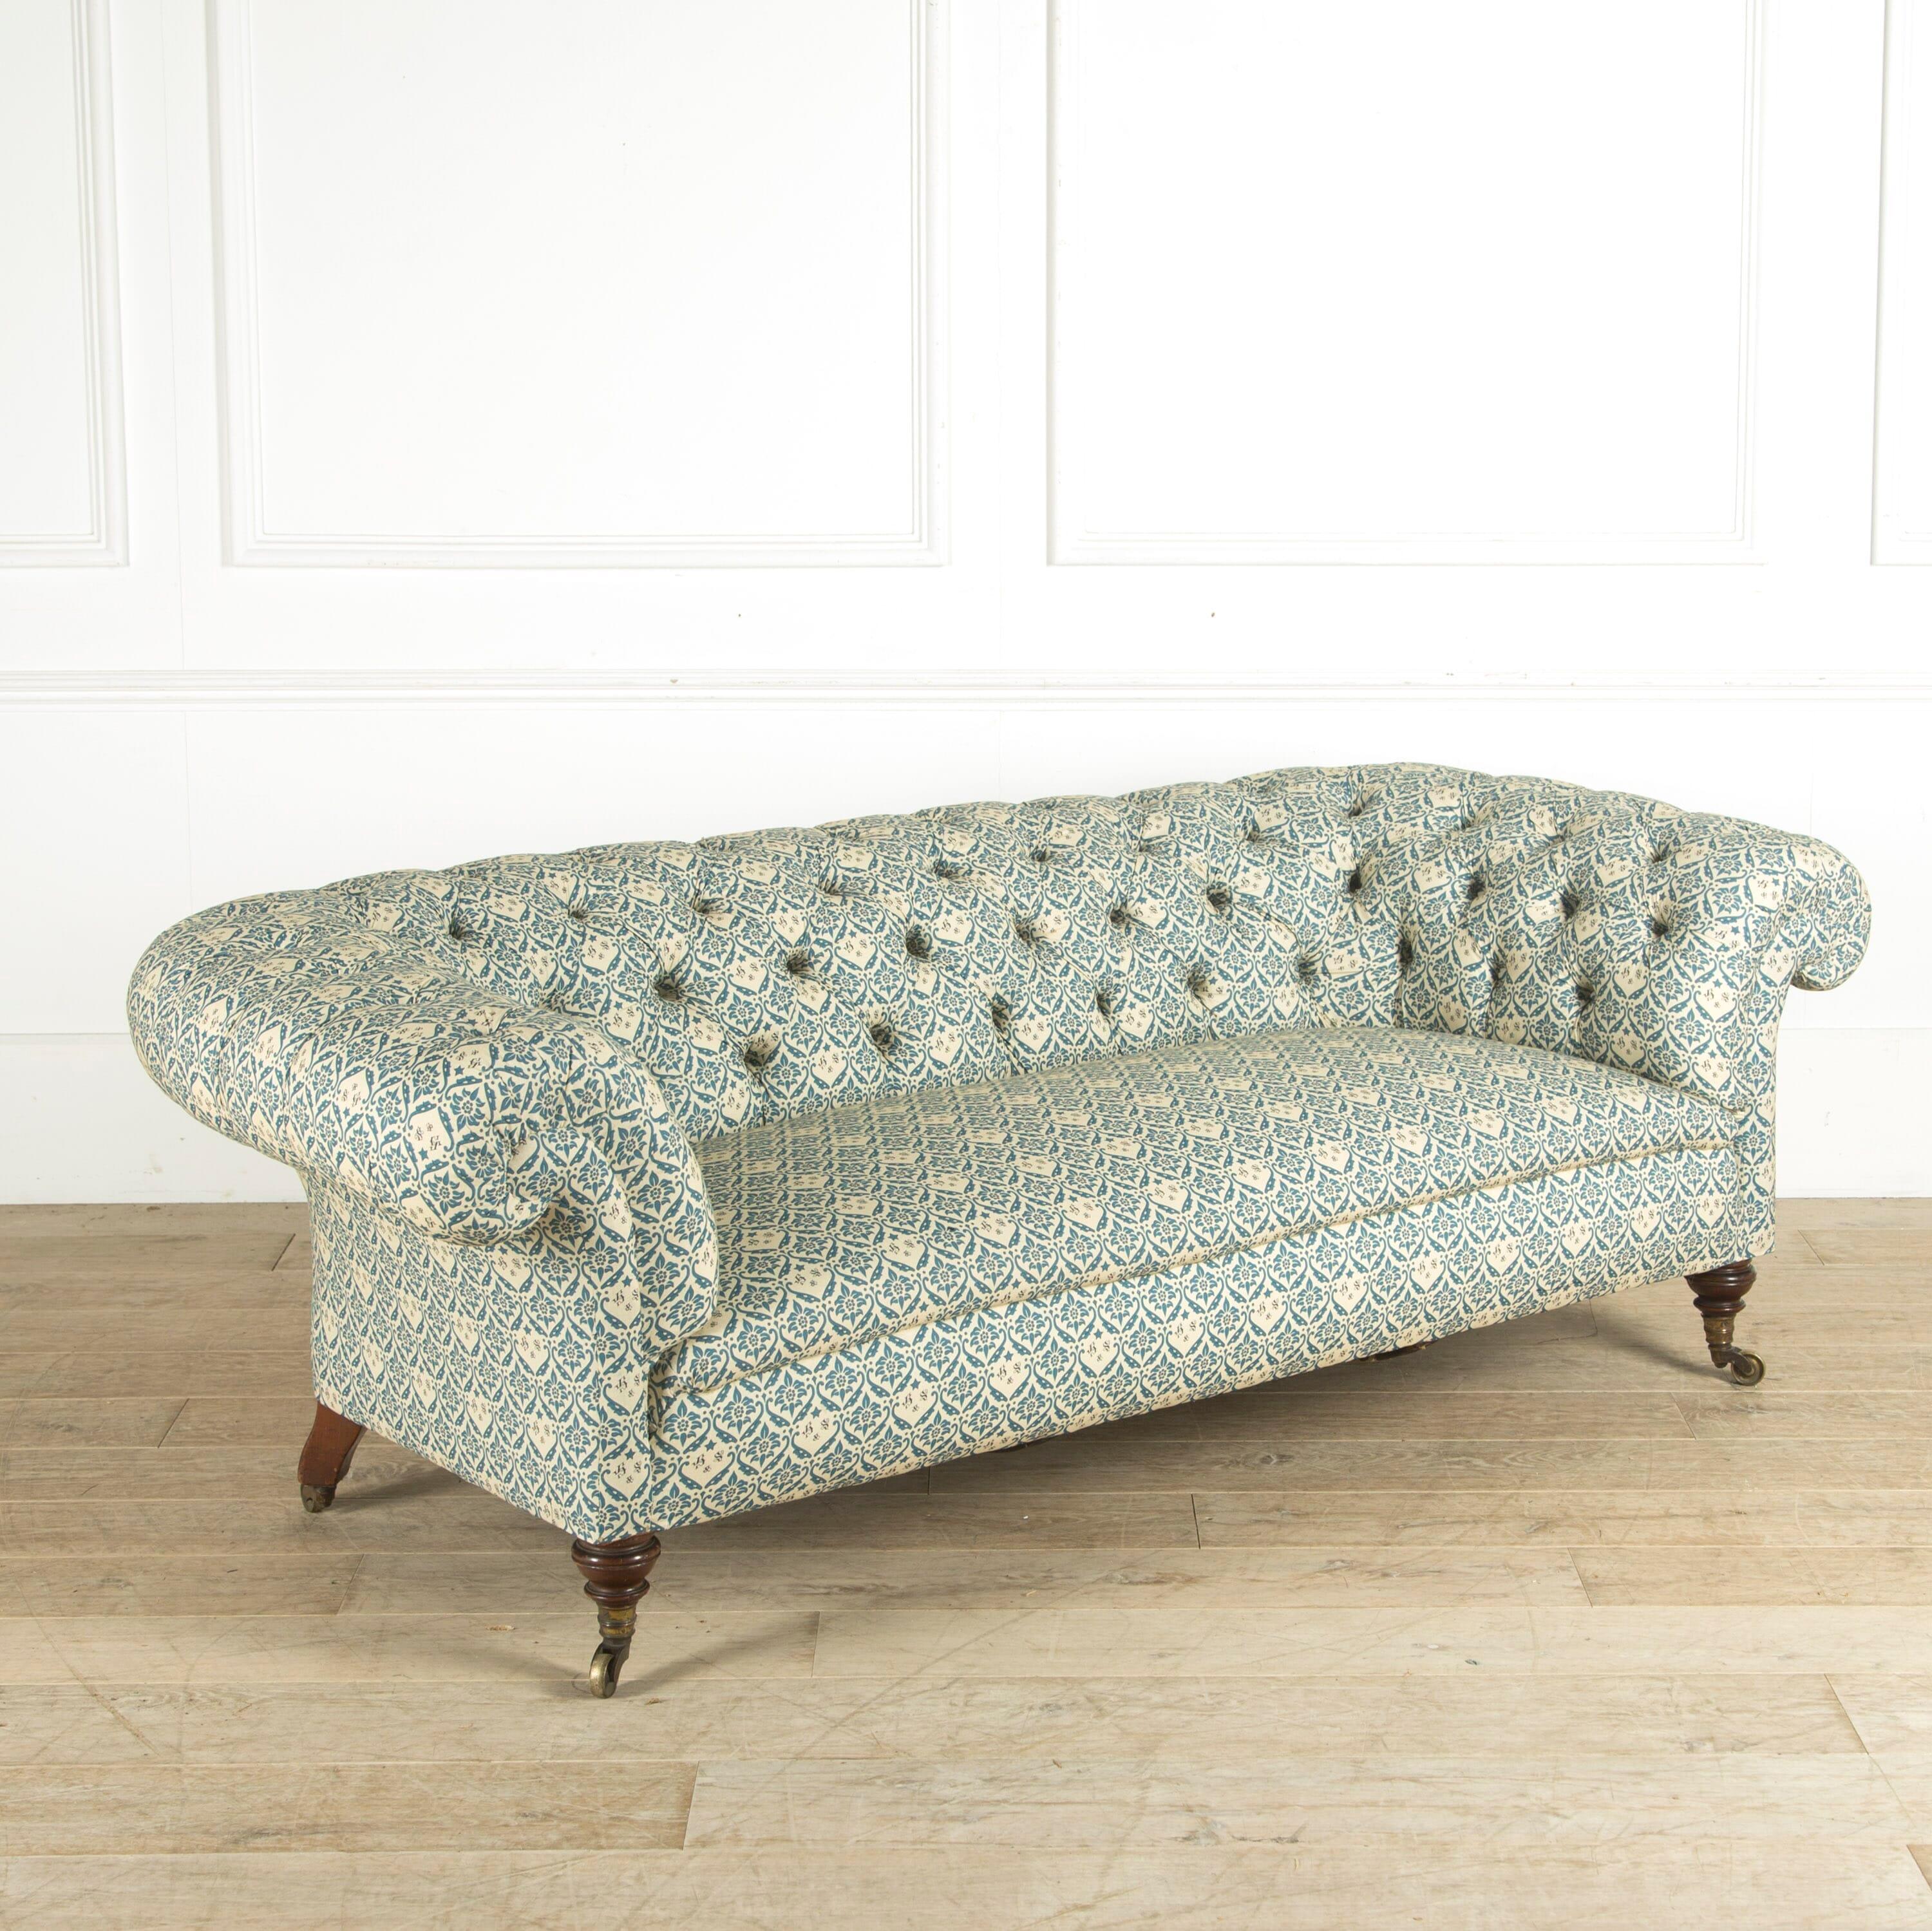 Totally refurbished Howard & Sons sofa, in the timeless Chesterfield style.

The sofa has been completely reupholstered in the traditional manner and with the materials used by the original company. It is covered with the iconic Howard-style